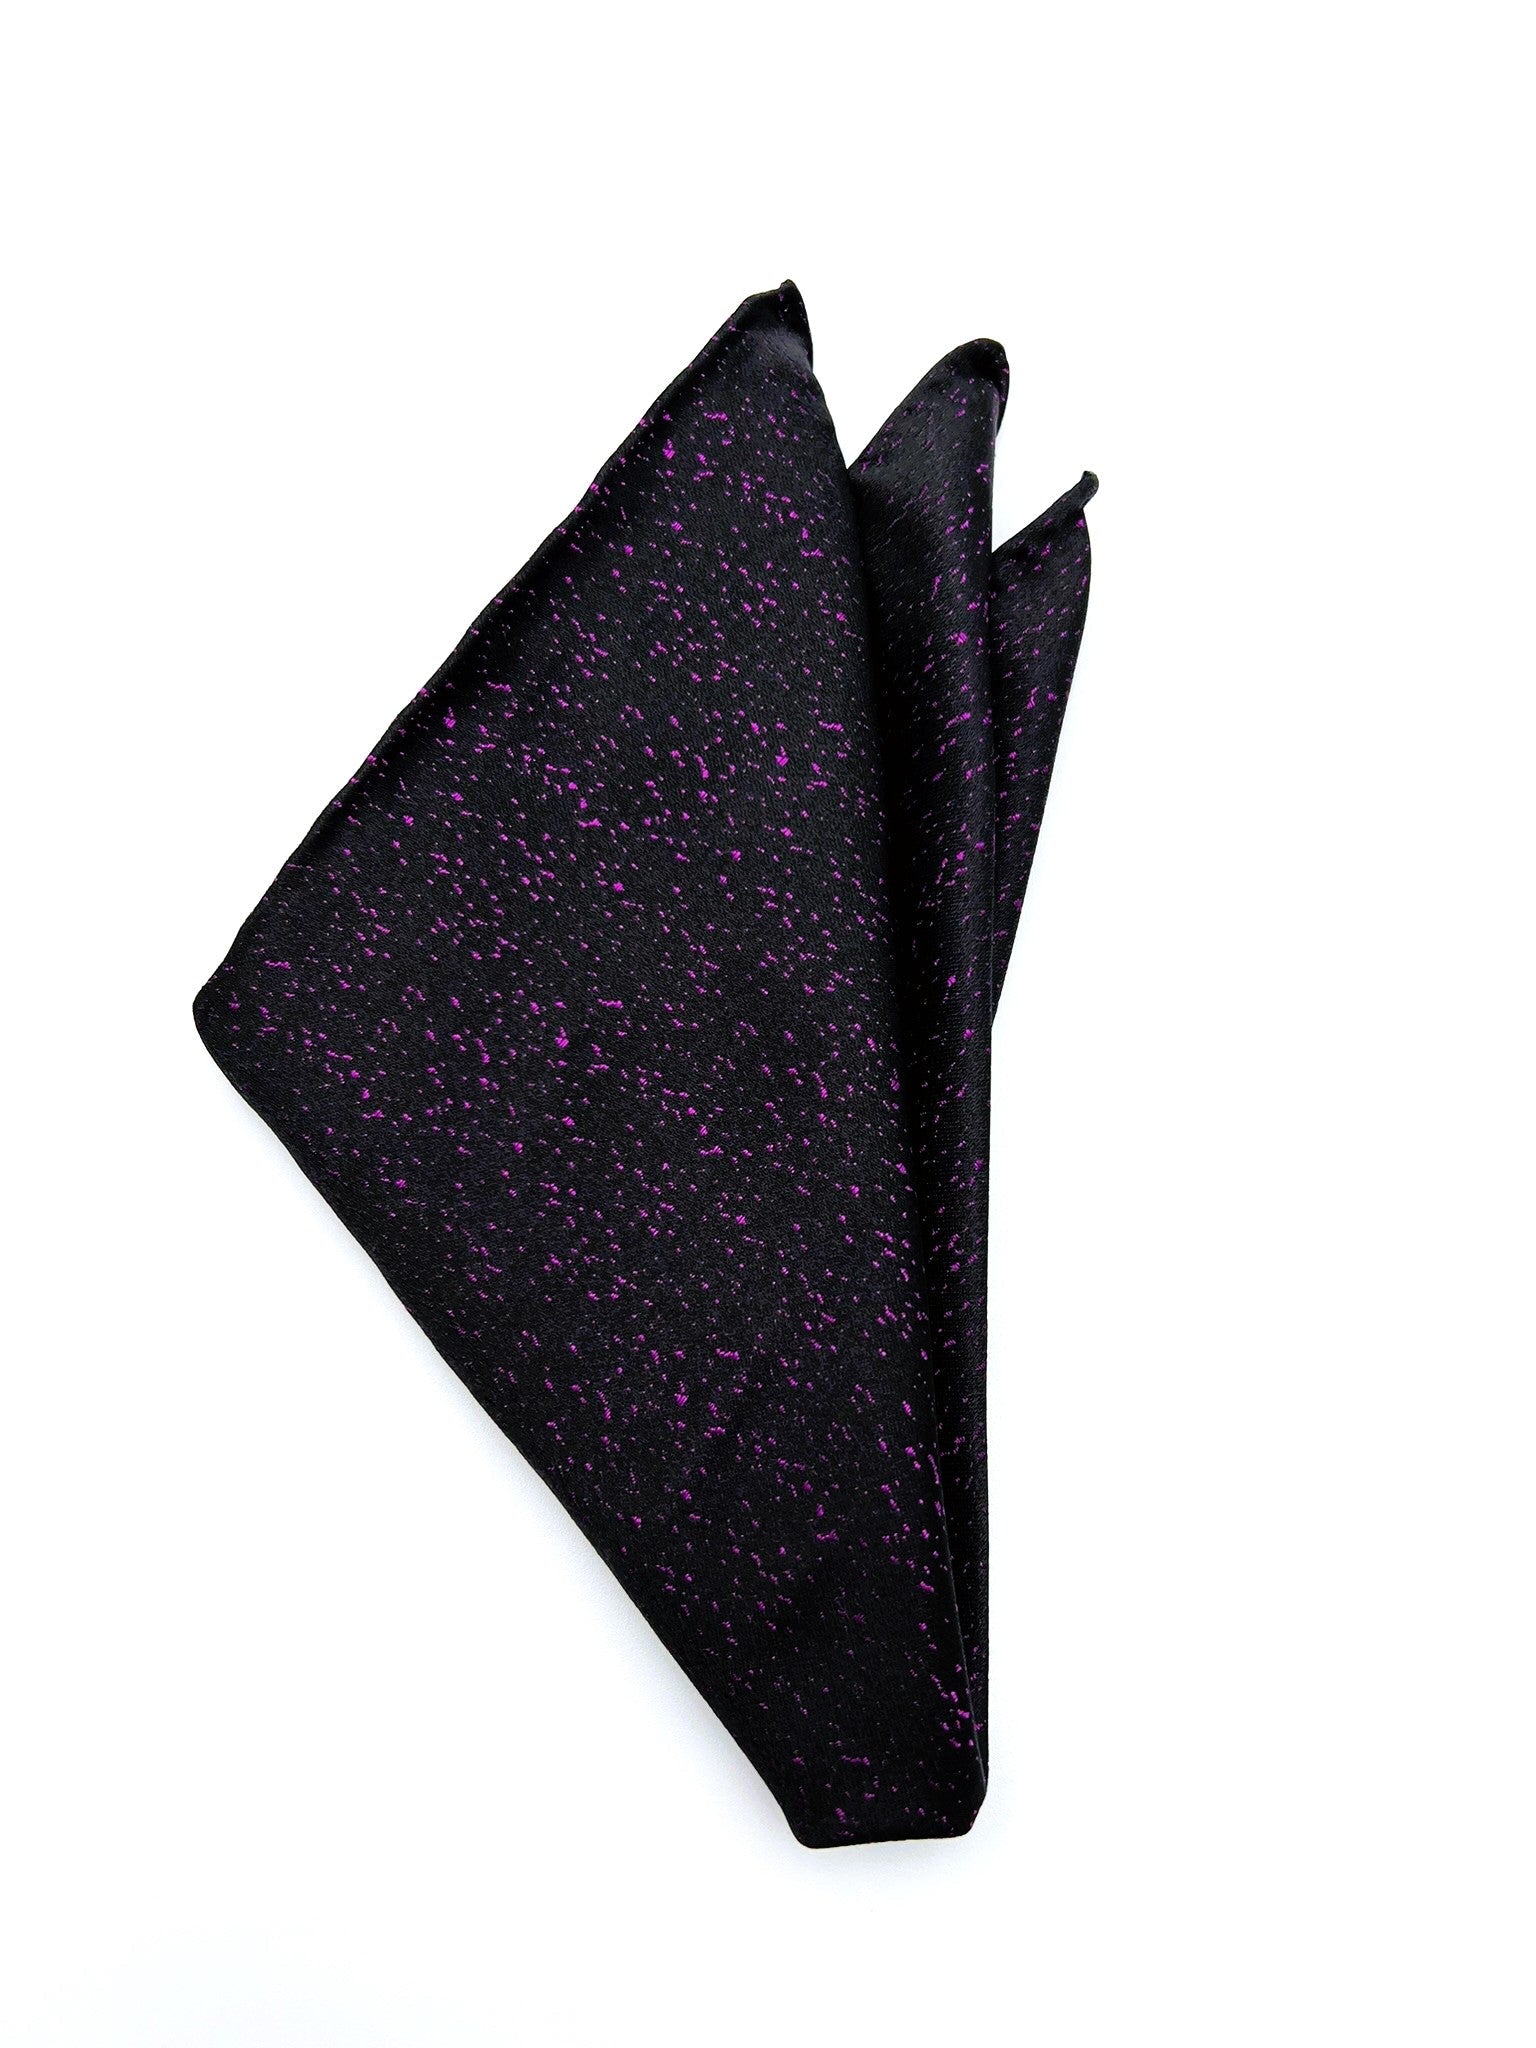 Navy Blue Pink Asymmetric Silk Pocket Square. Handmade in Italy. Pocket Square in 100% pure Italian silk,  hand-finished edges. A must-have accessory for every  man's wardrobe that can suit either  a classic or sophisticated look.| Sartoria Dei Duchi - Atri